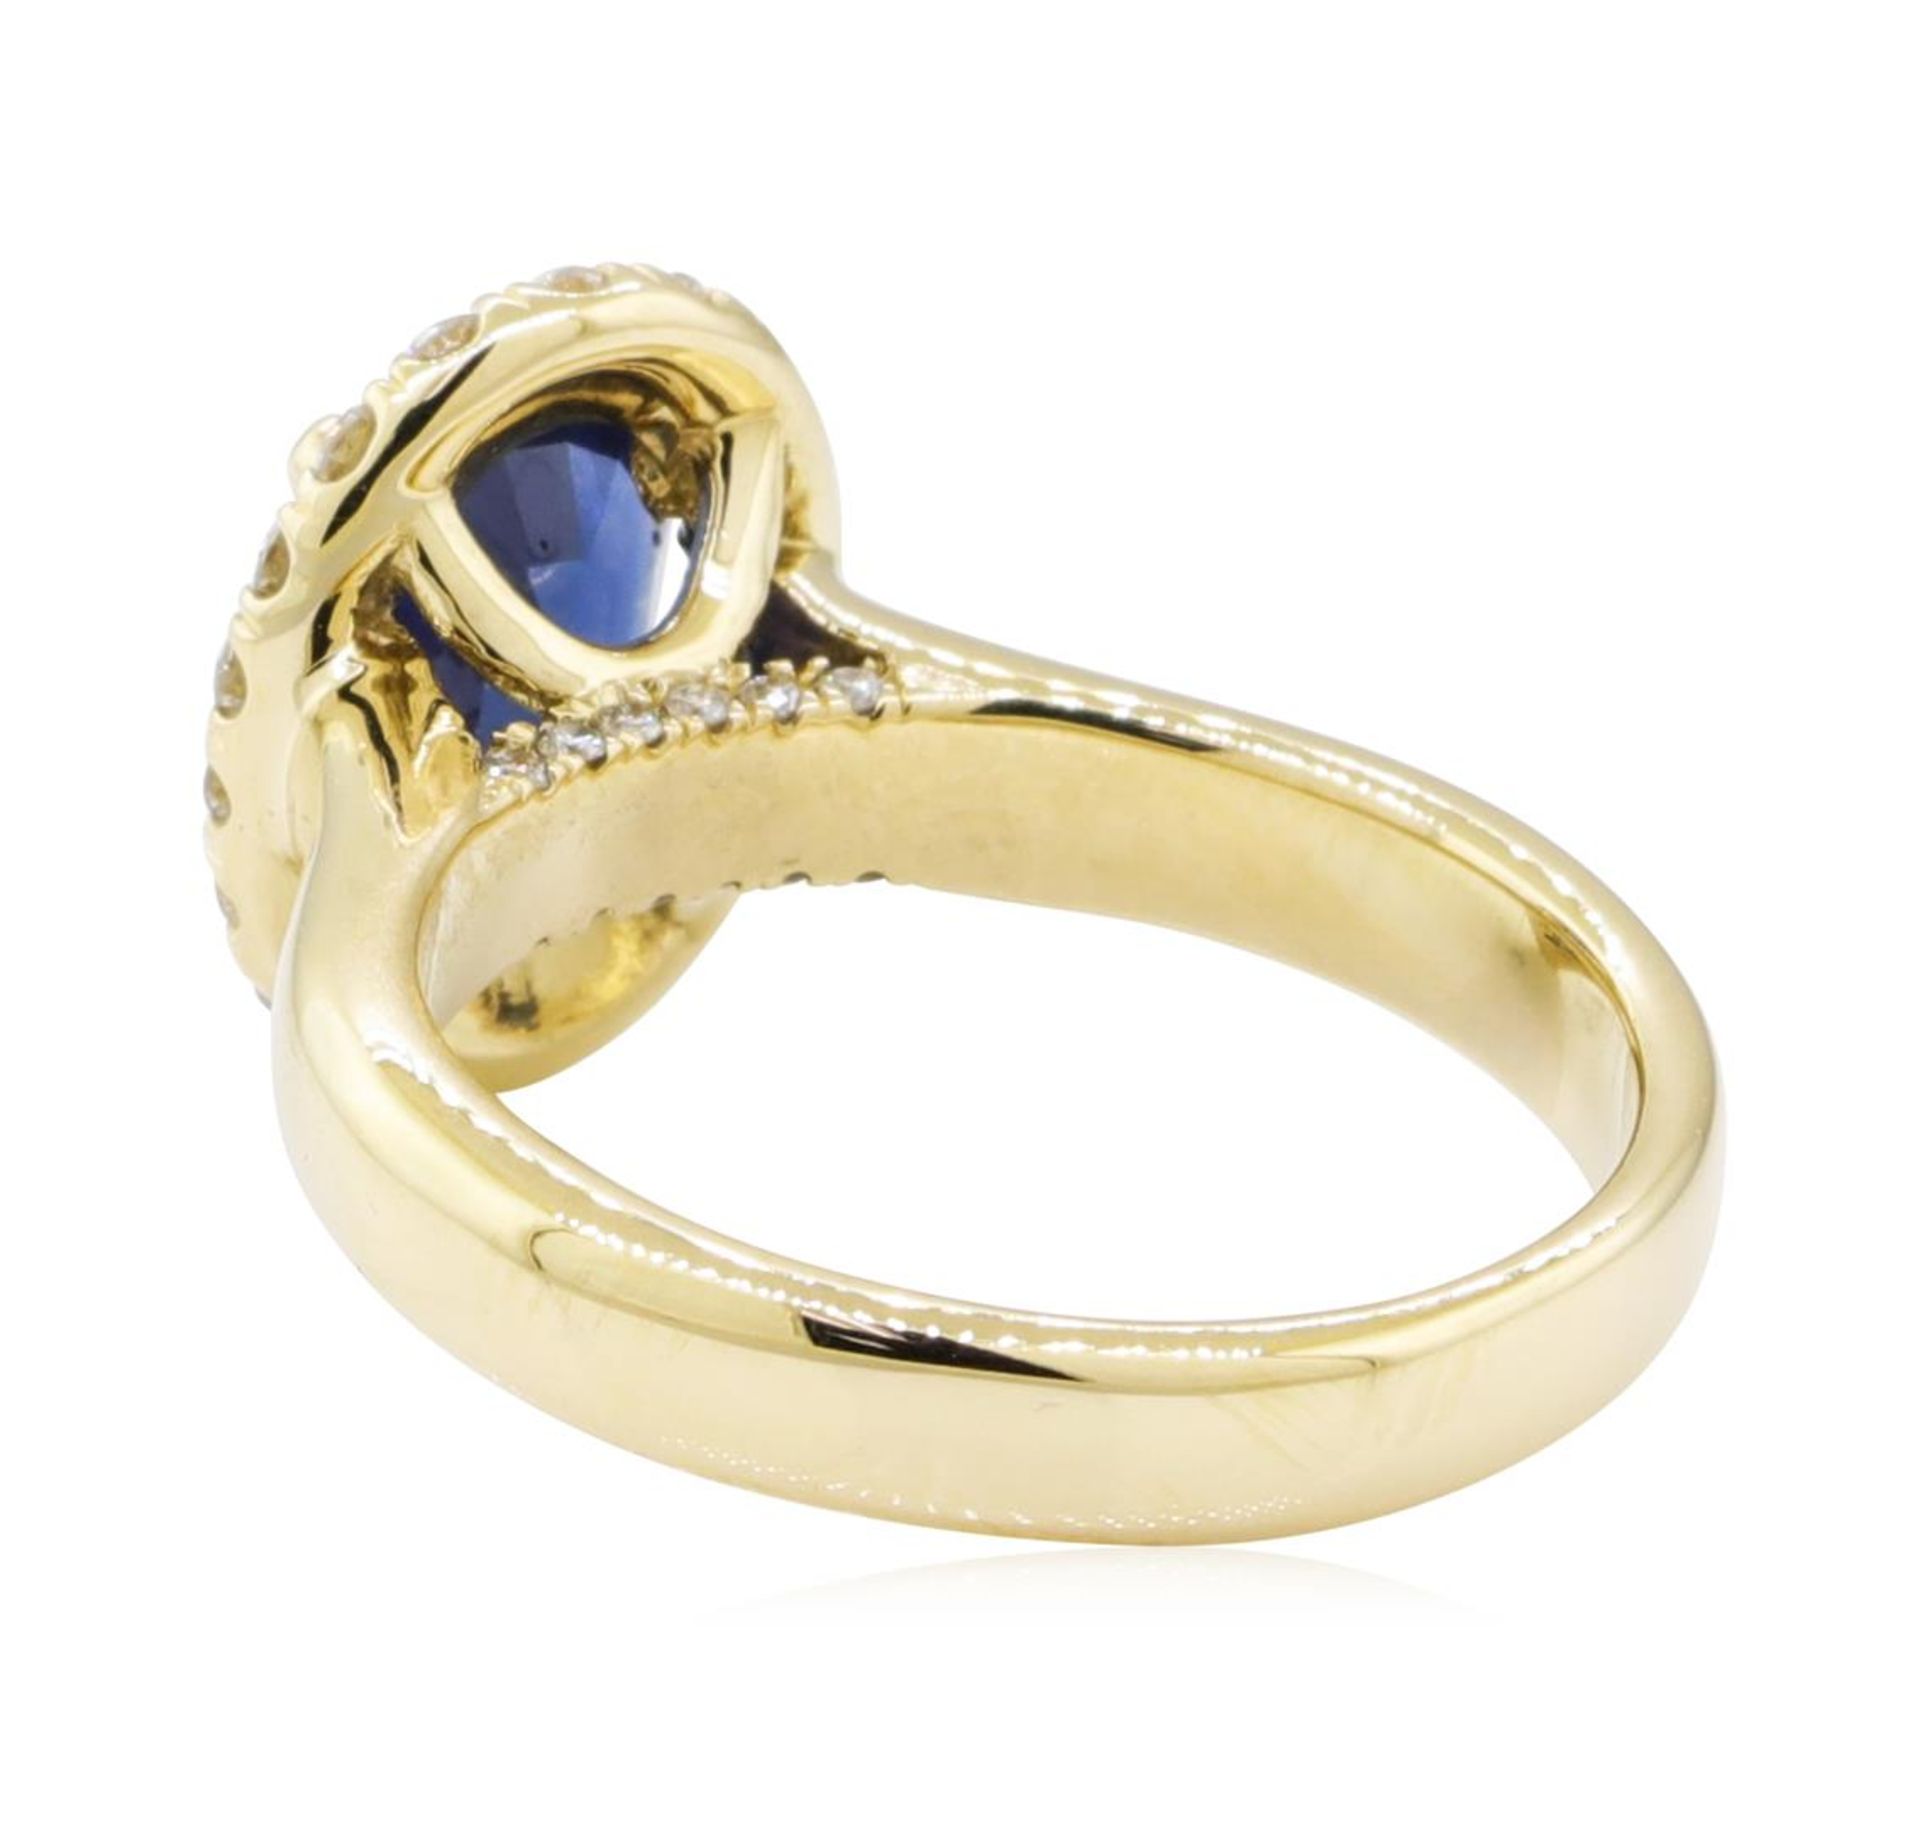 1.48 ctw Sapphire and Diamond Ring - 14KT Yellow Gold - Image 3 of 5